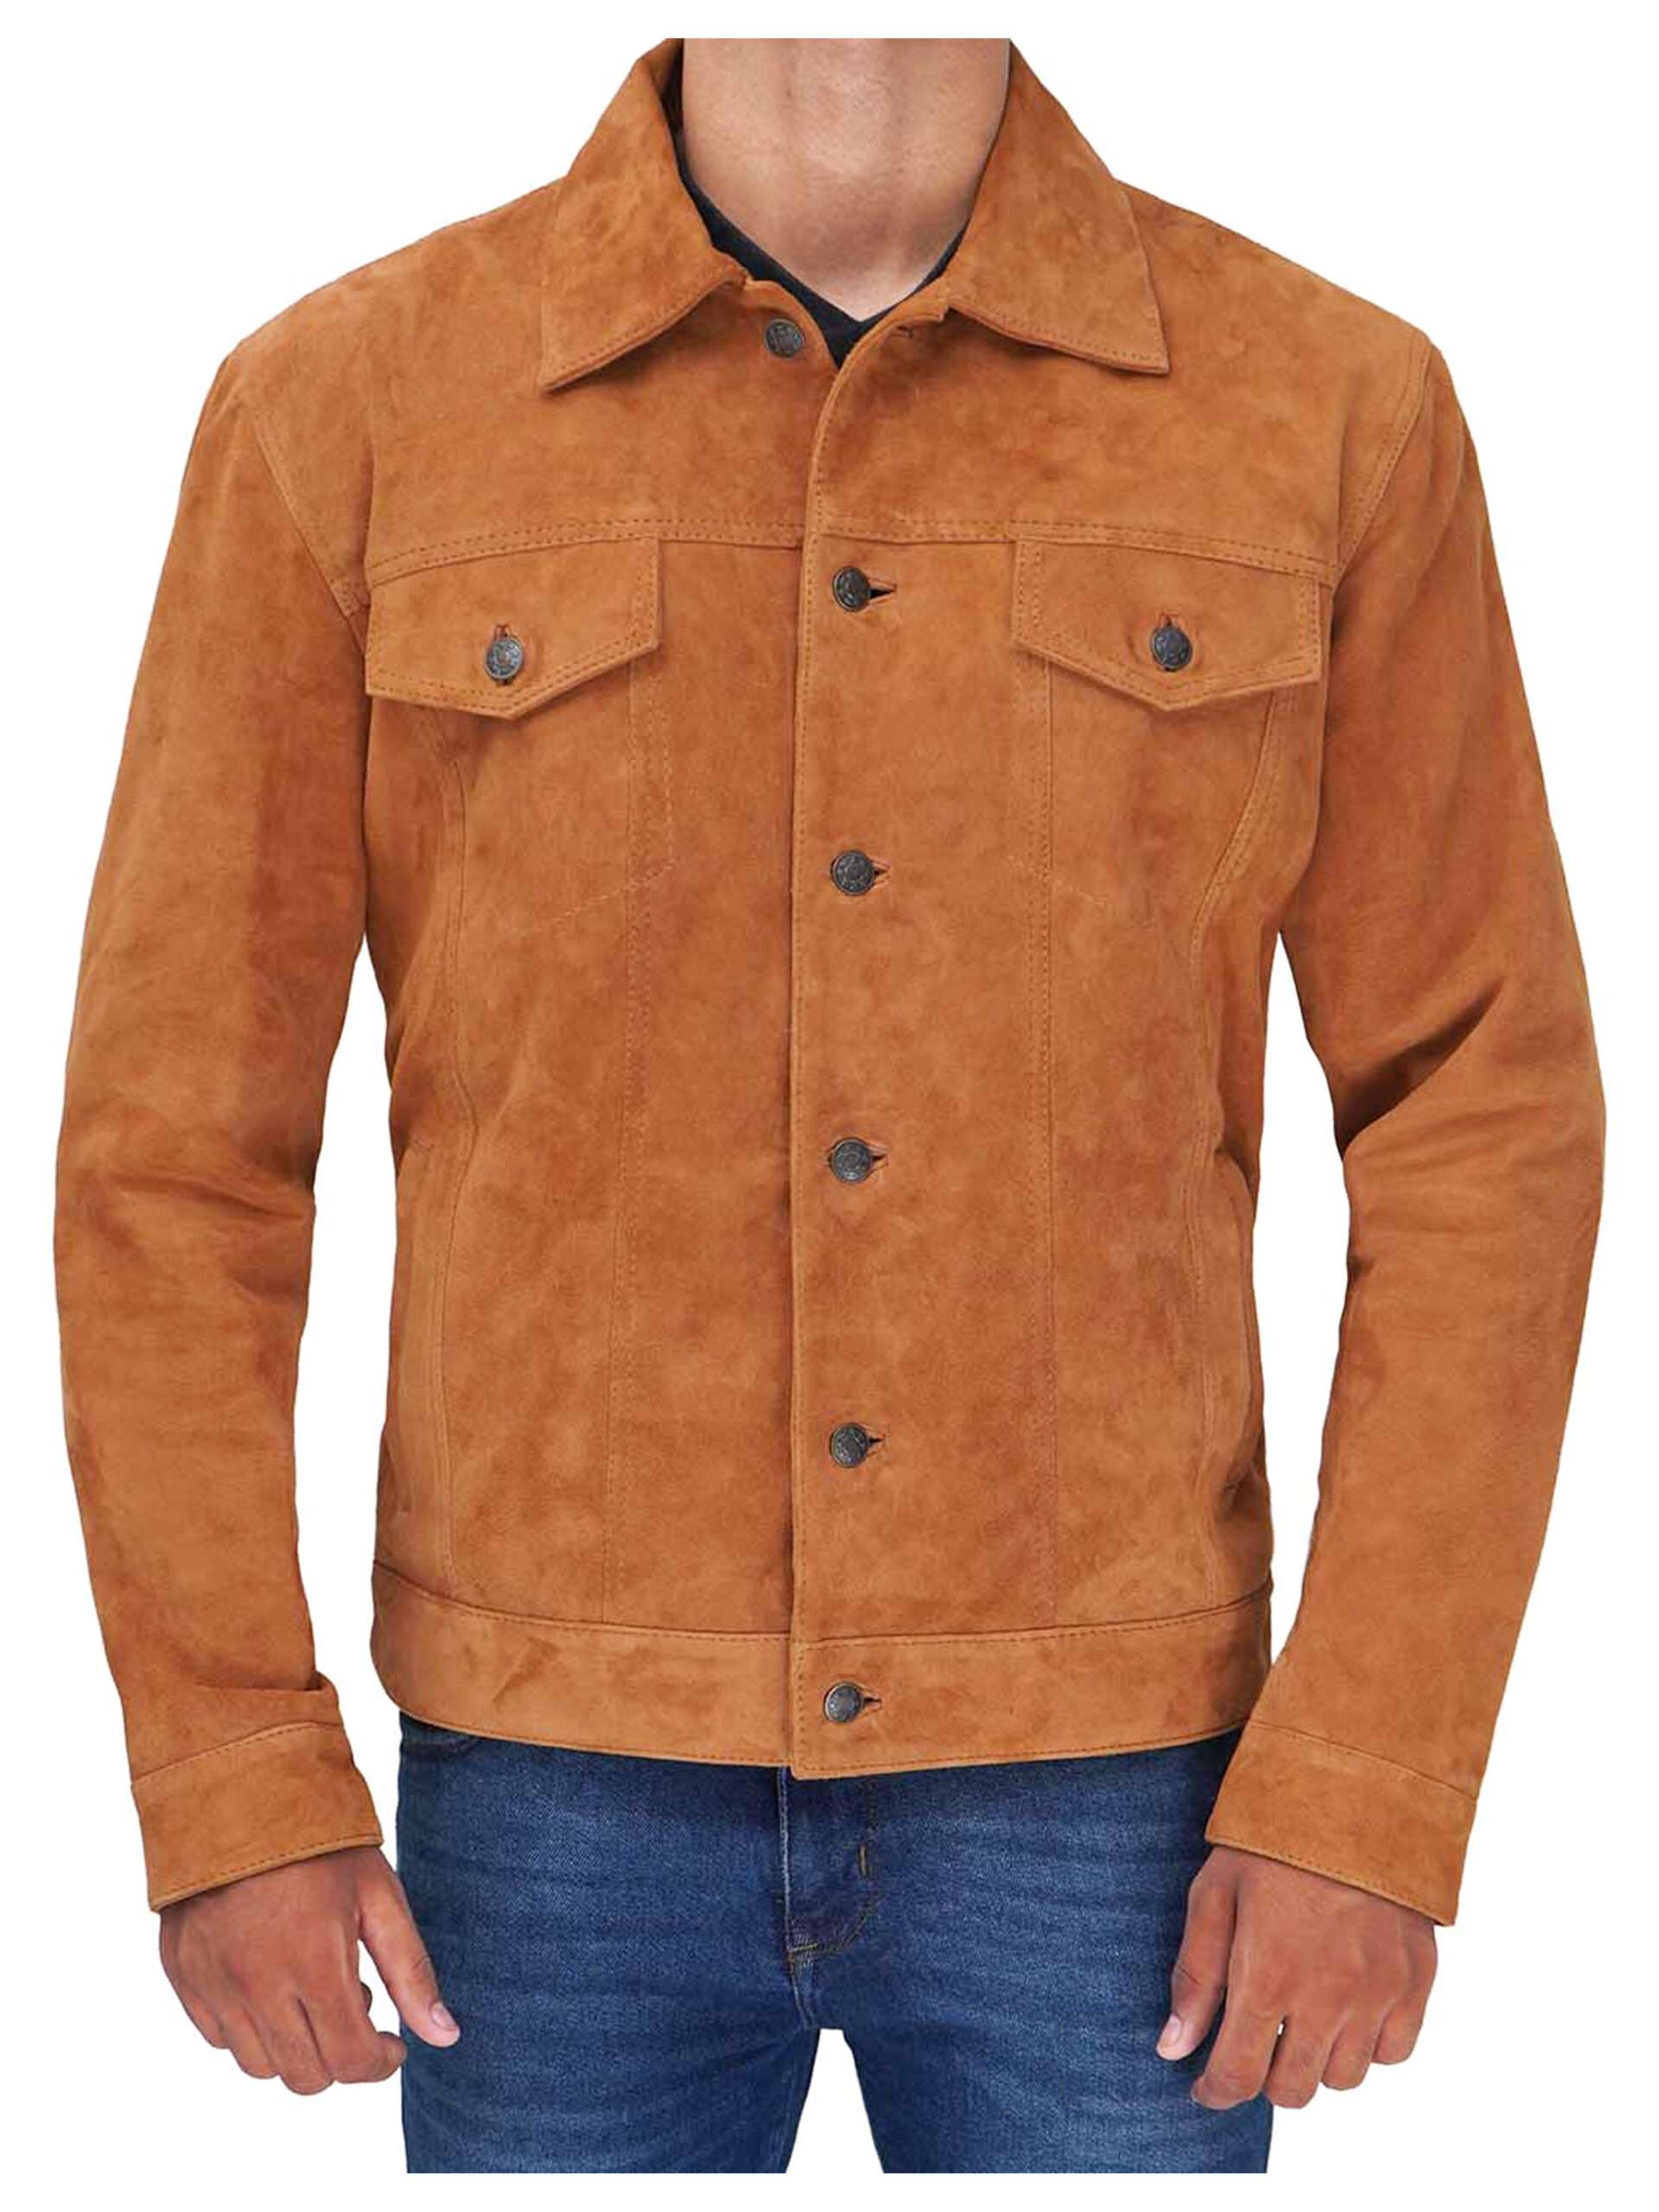 Quality Logan Suede Brown Leather Trucker Jacket